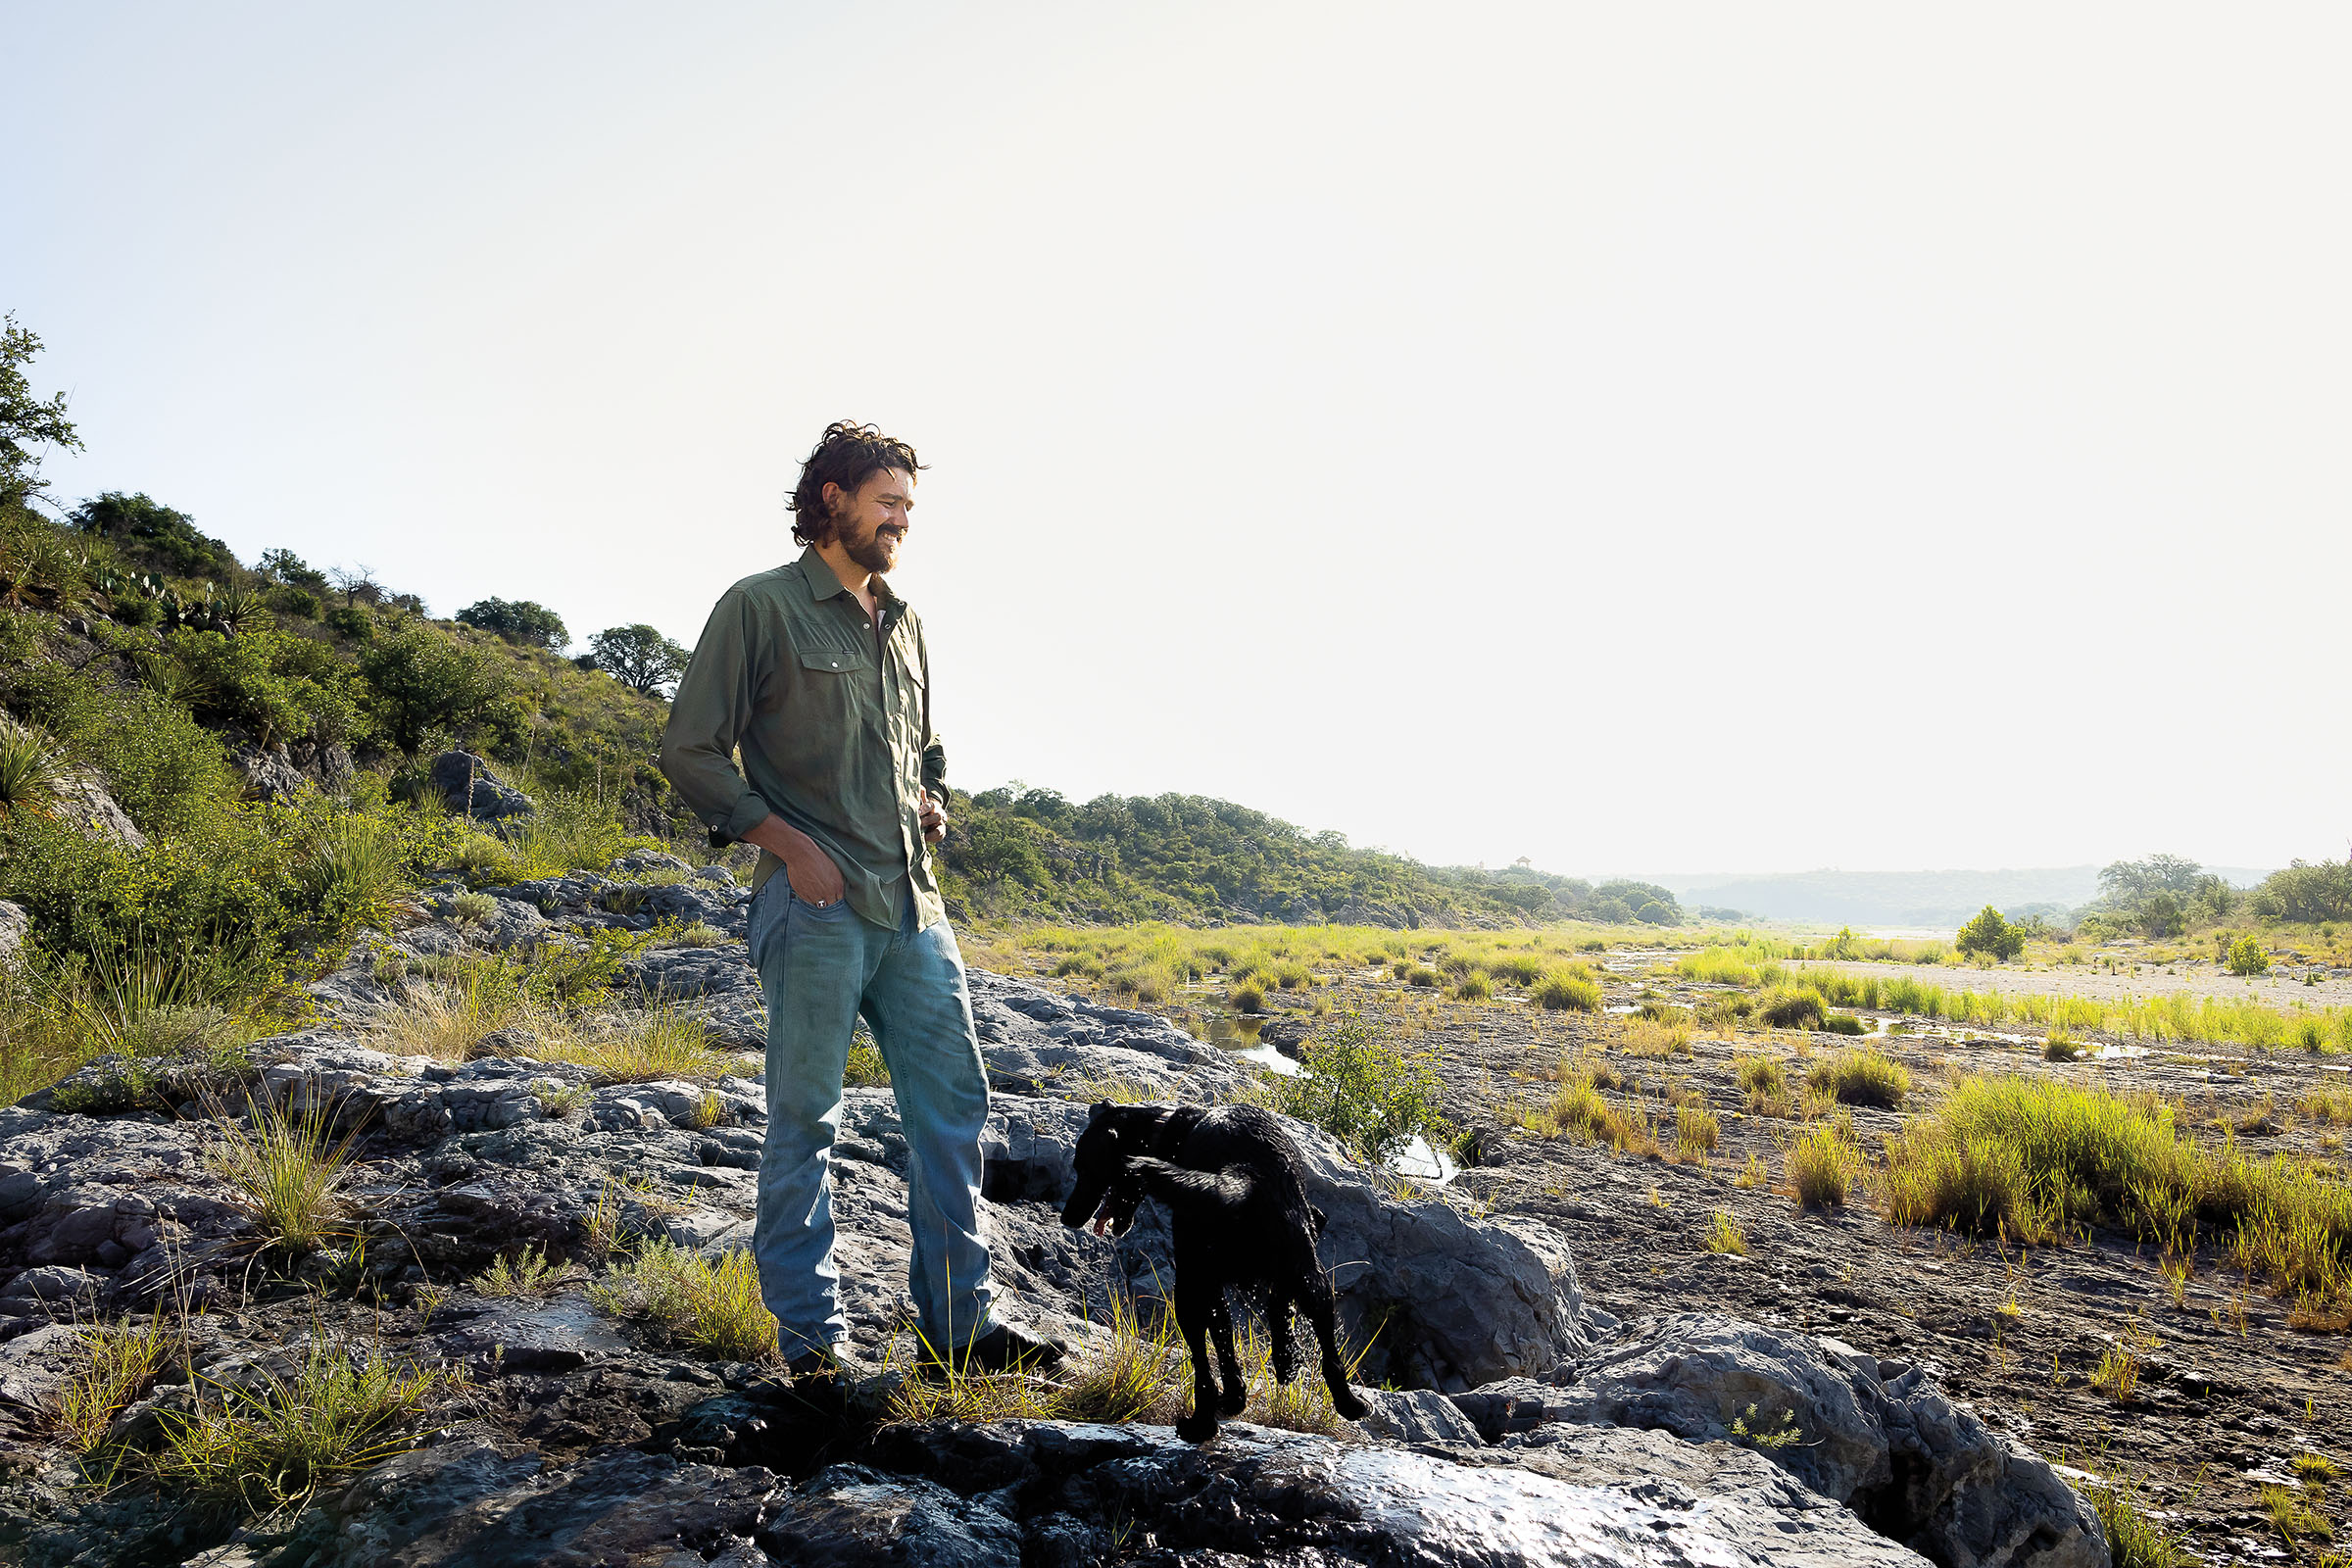 A man smiles and tucks his hands into his pockets while walking through a rocky landscape with a black dog